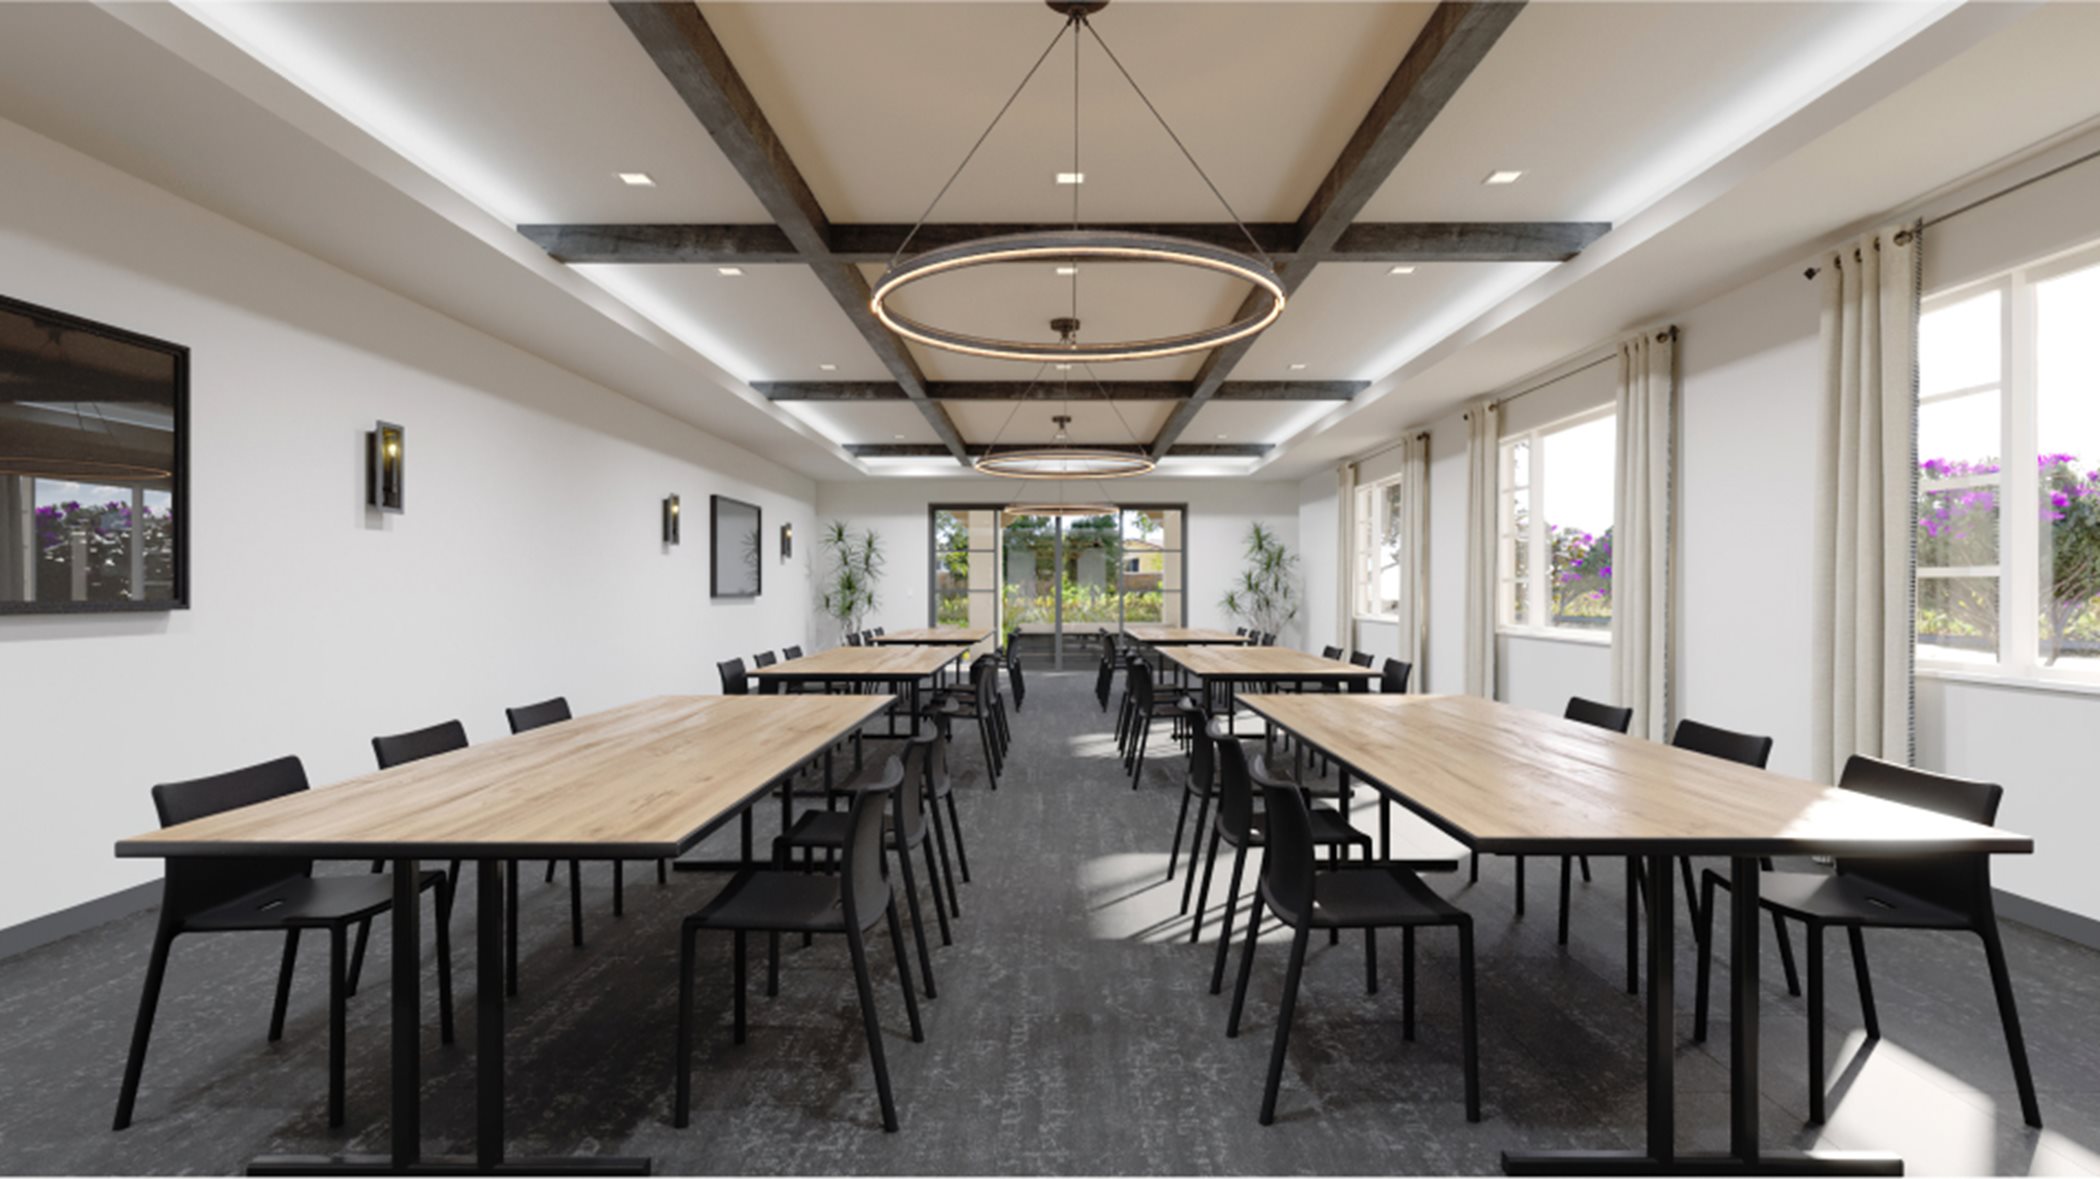 Clubroom for meetings or other gatherings with tables and chairs